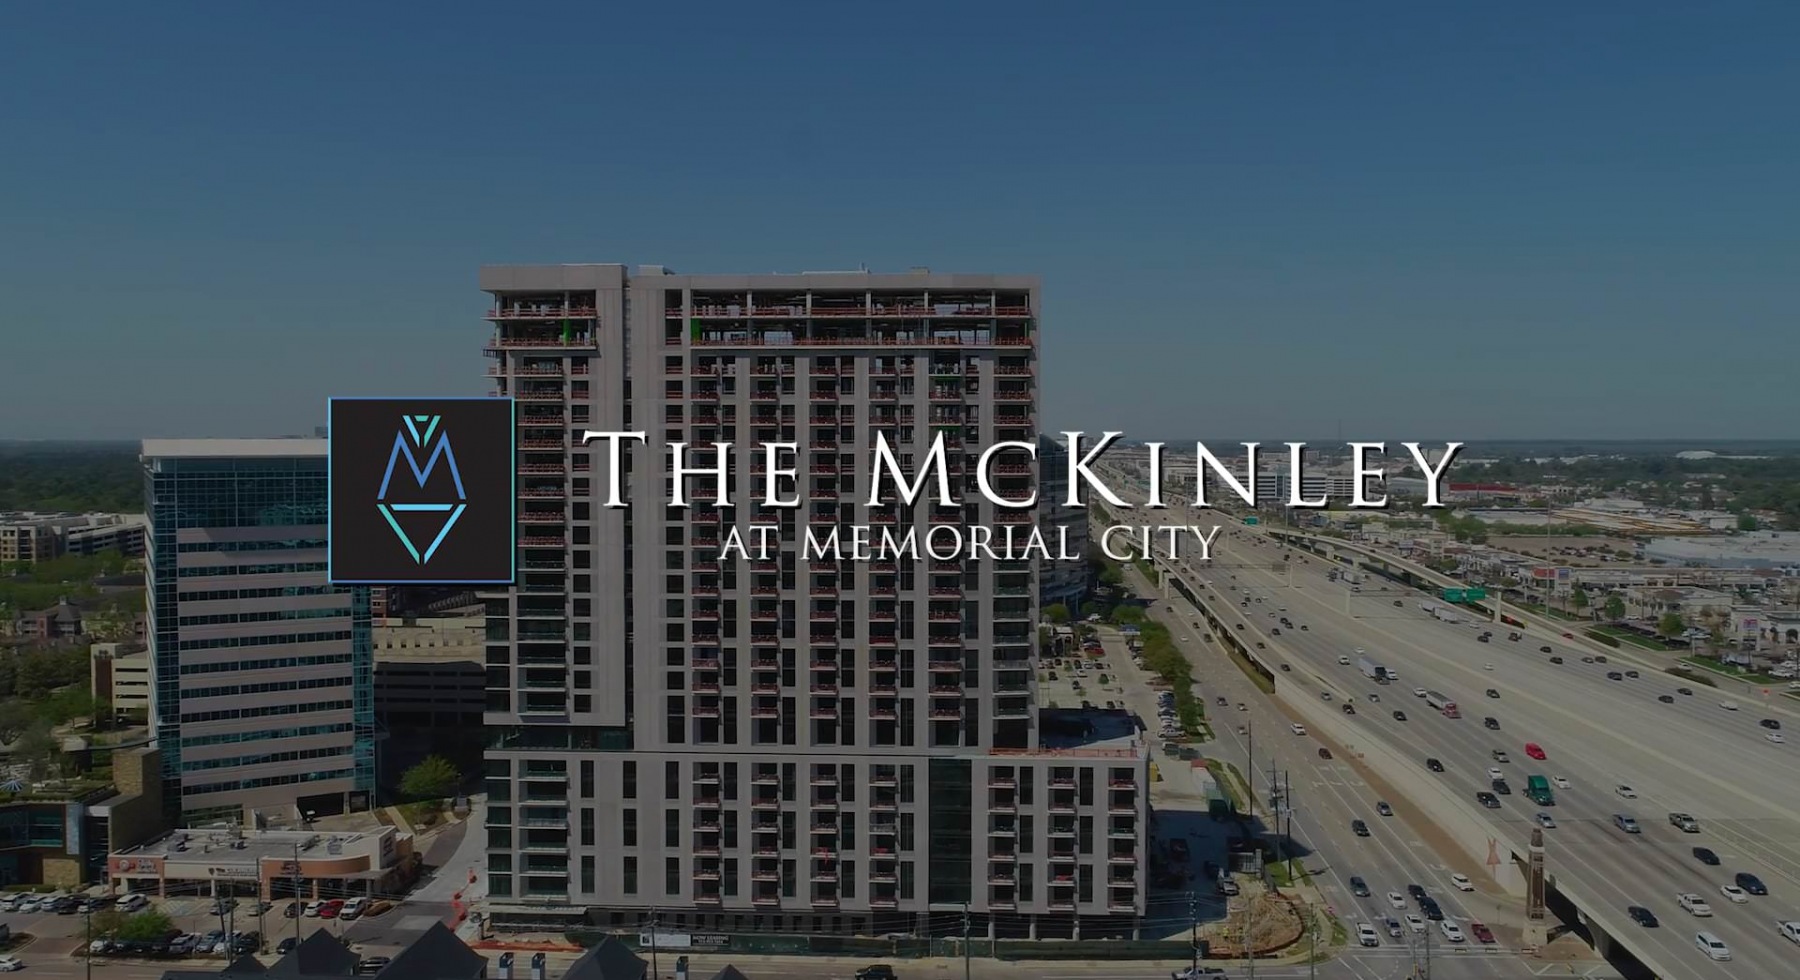 The McKinley Welcome Video